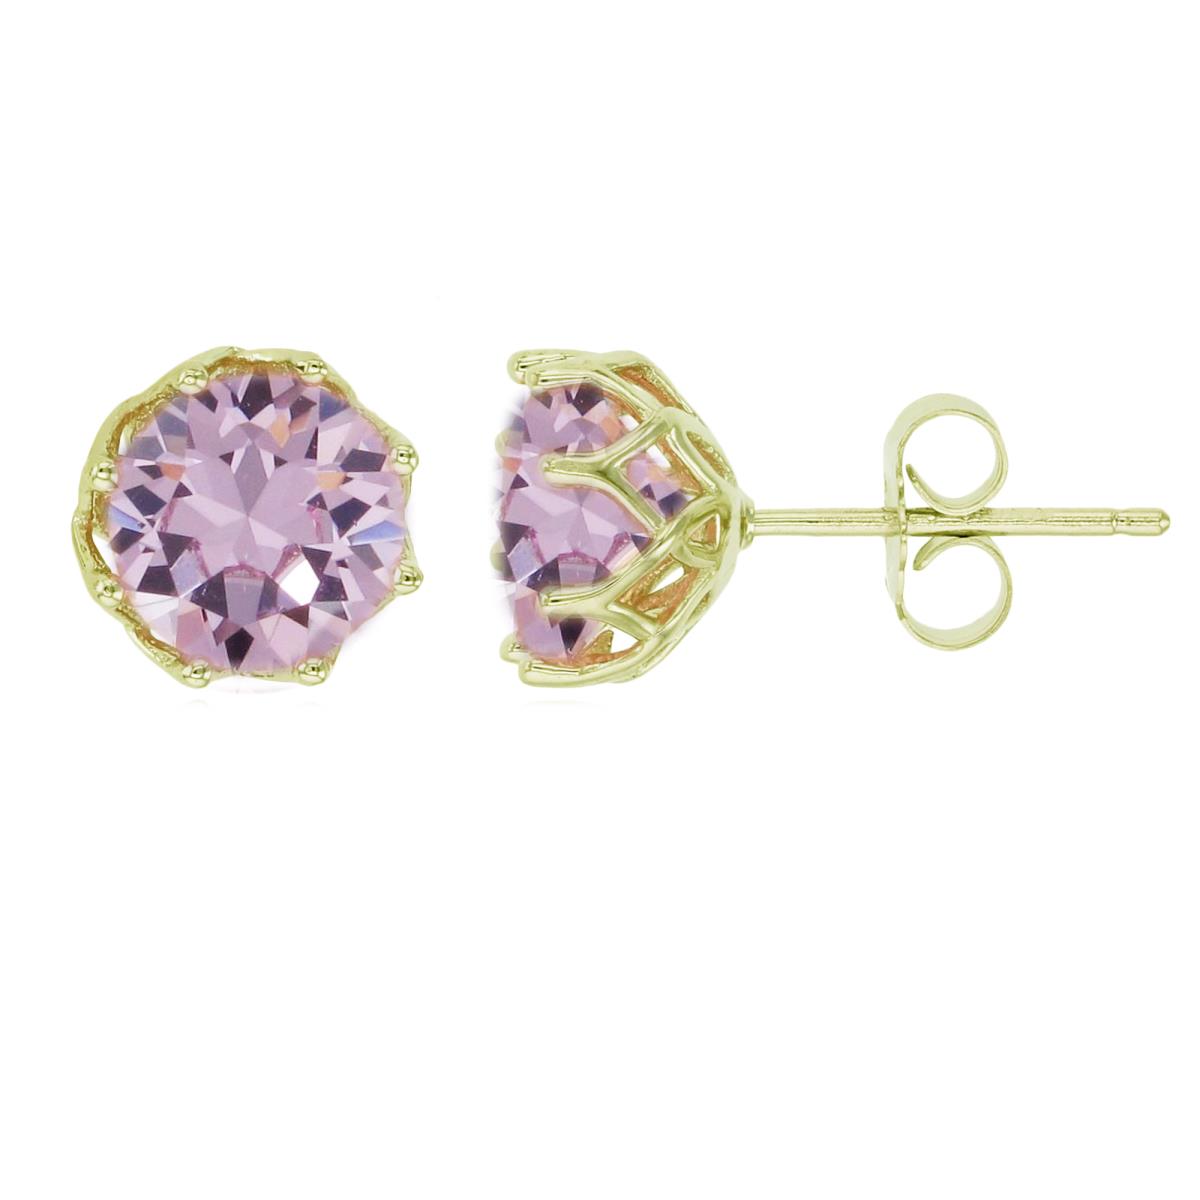 14K Yellow Gold 8mm Round Cut Morganite Solitaire Stud Earring